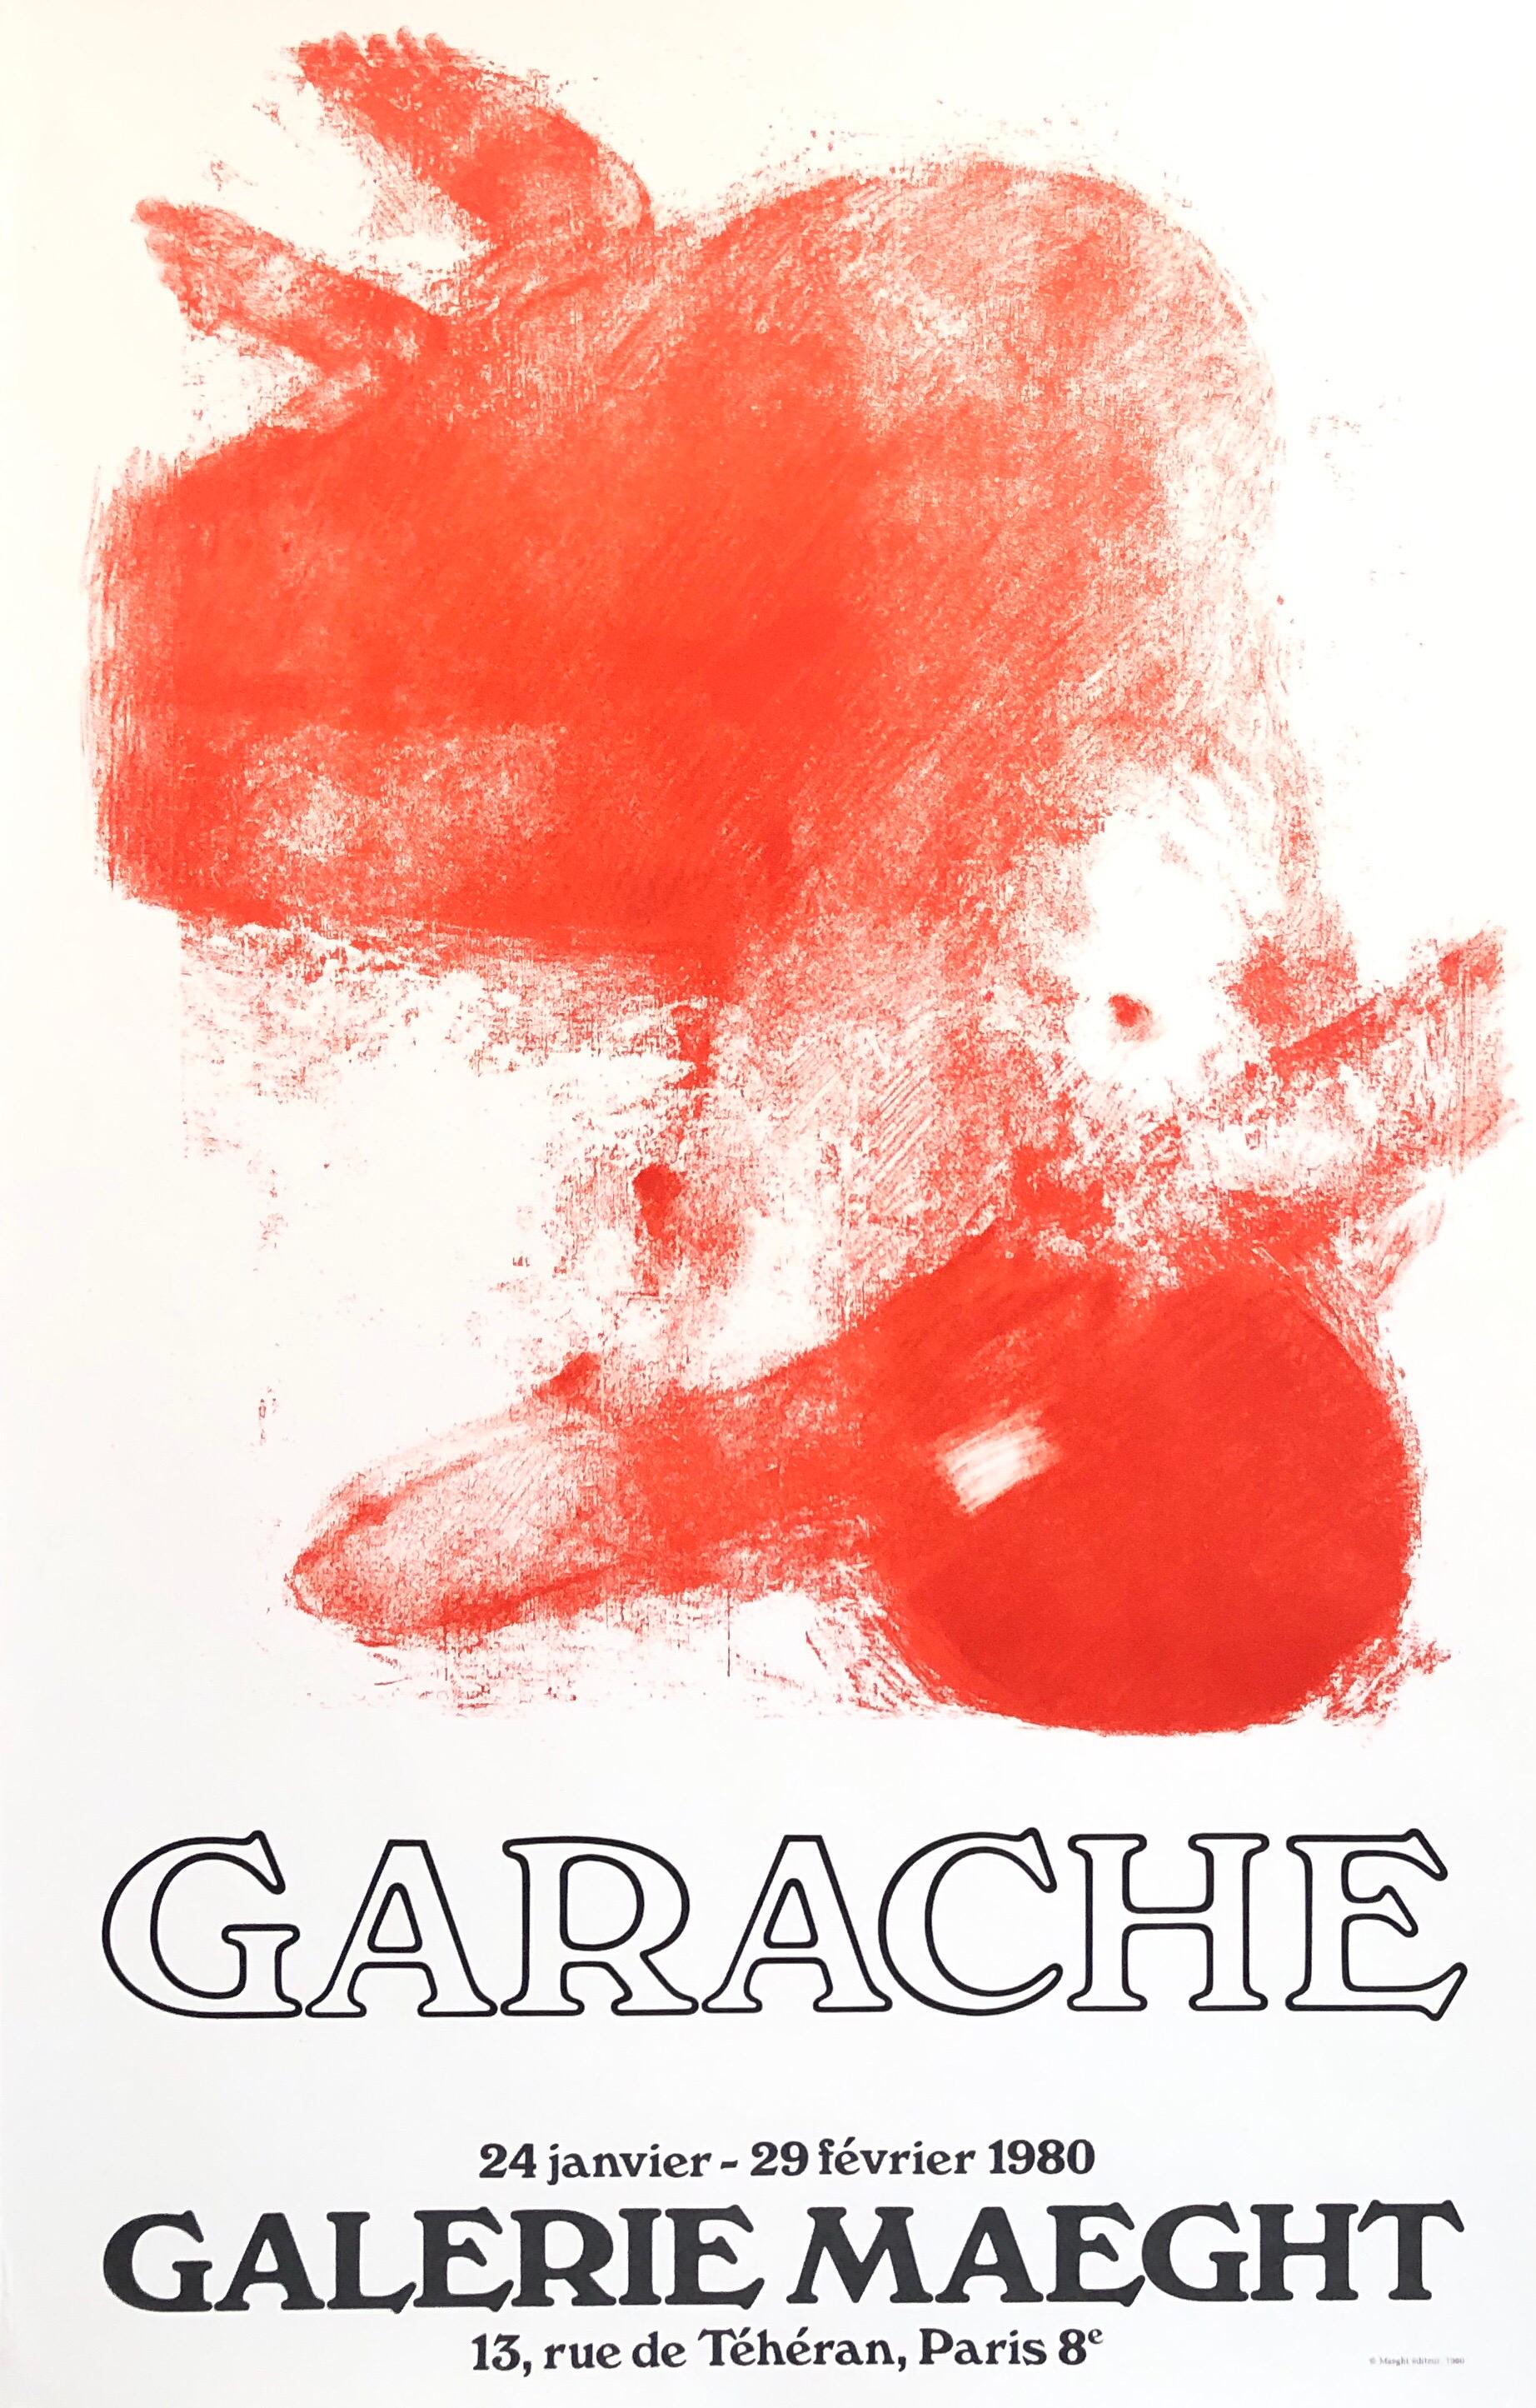 Claude Garache Abstract Print - French Post Modern Orange Red Pop Art Lithograph Vintage Poster Galerie Maeght